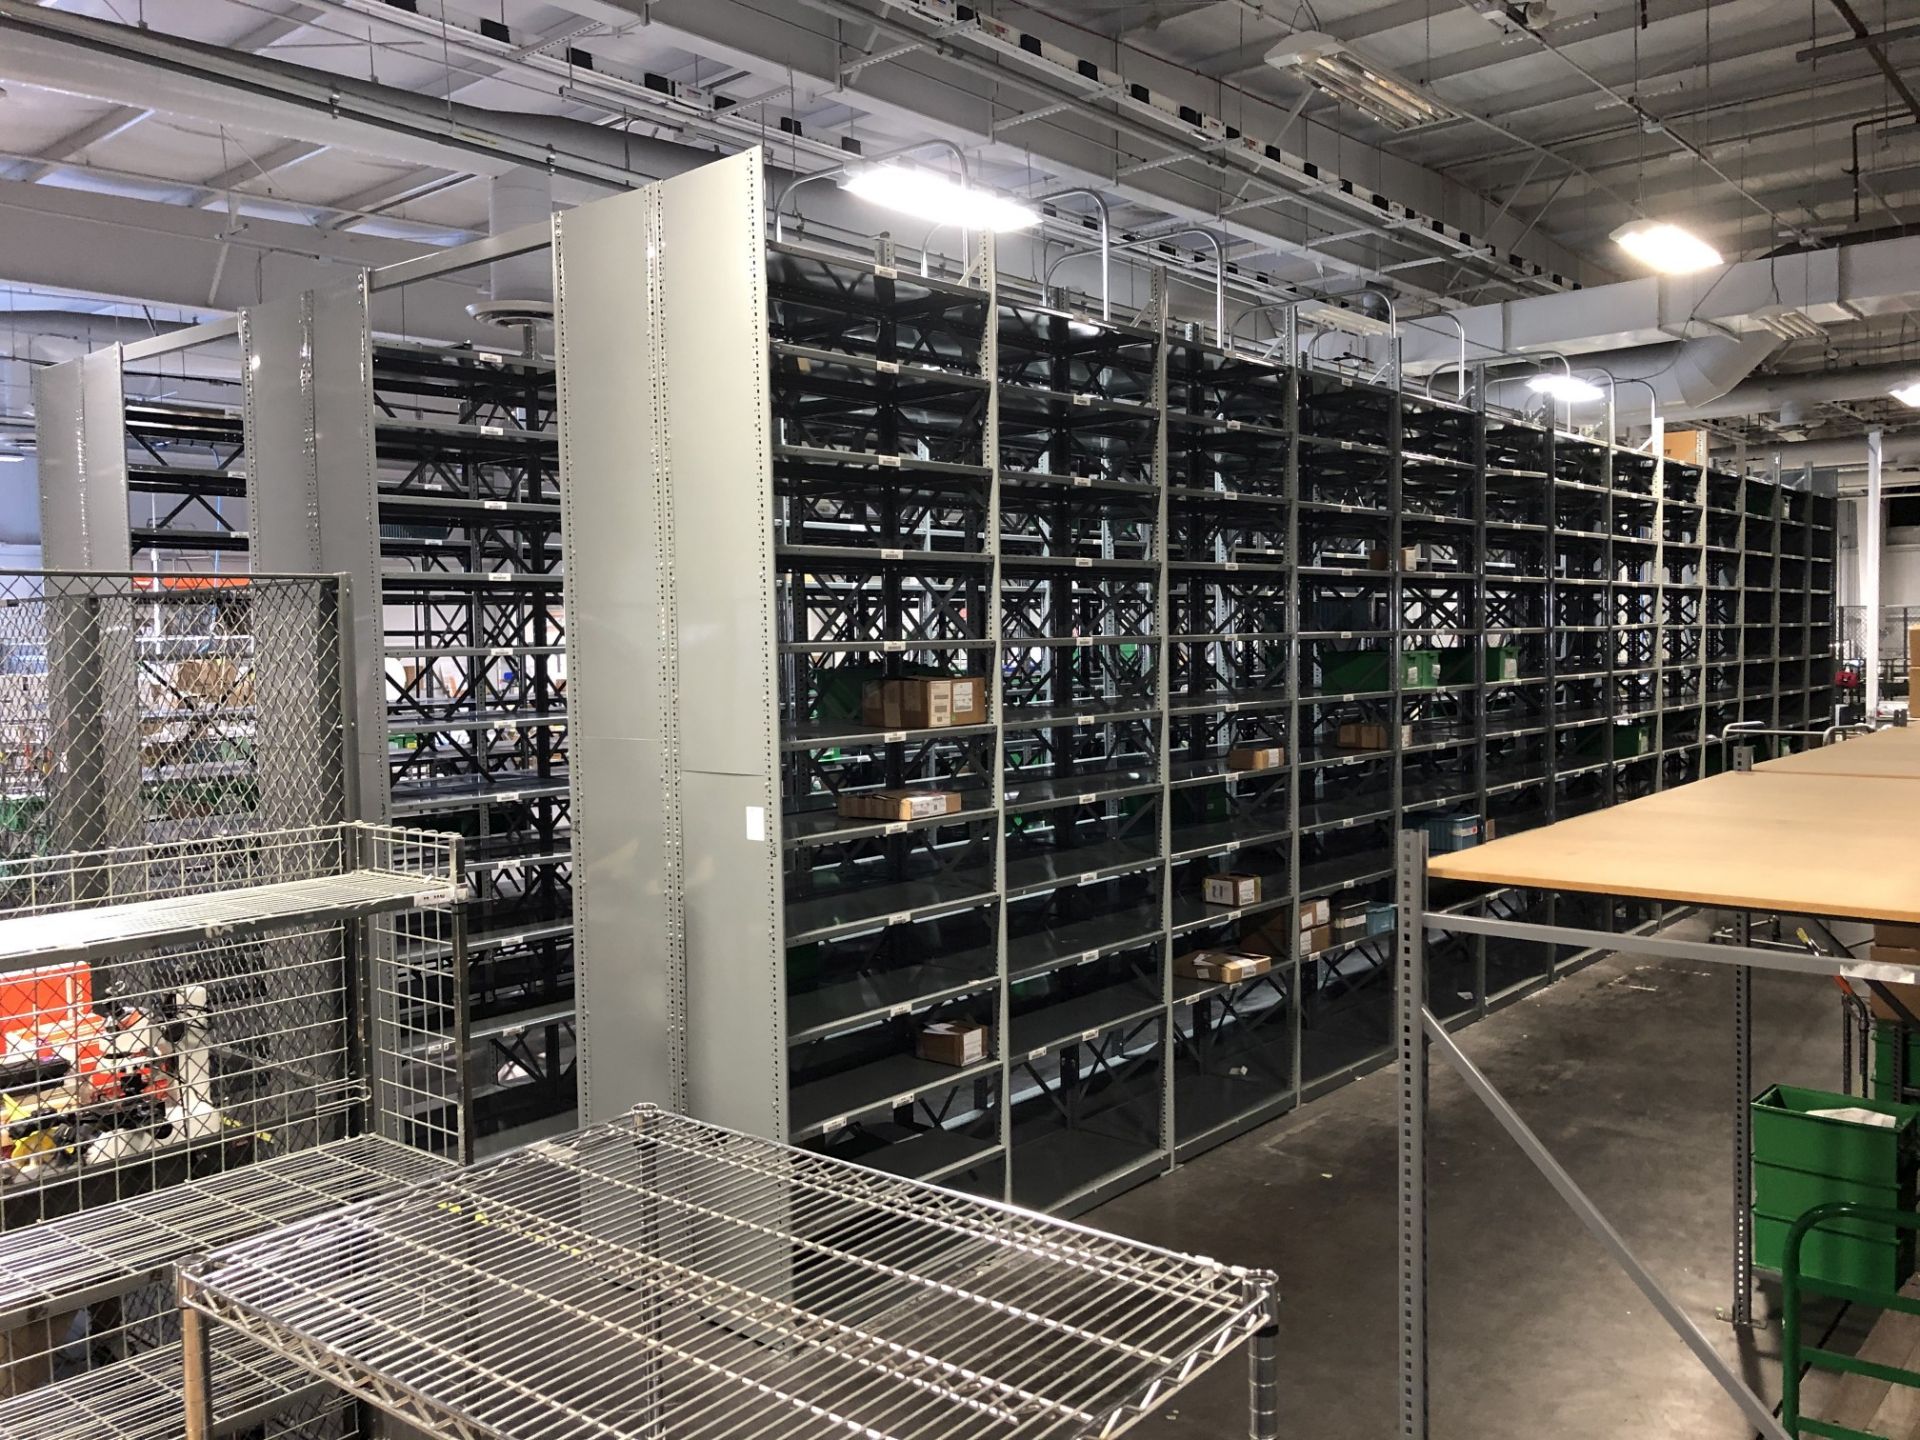 (3) Rows of Two-Sided Metal Shelving